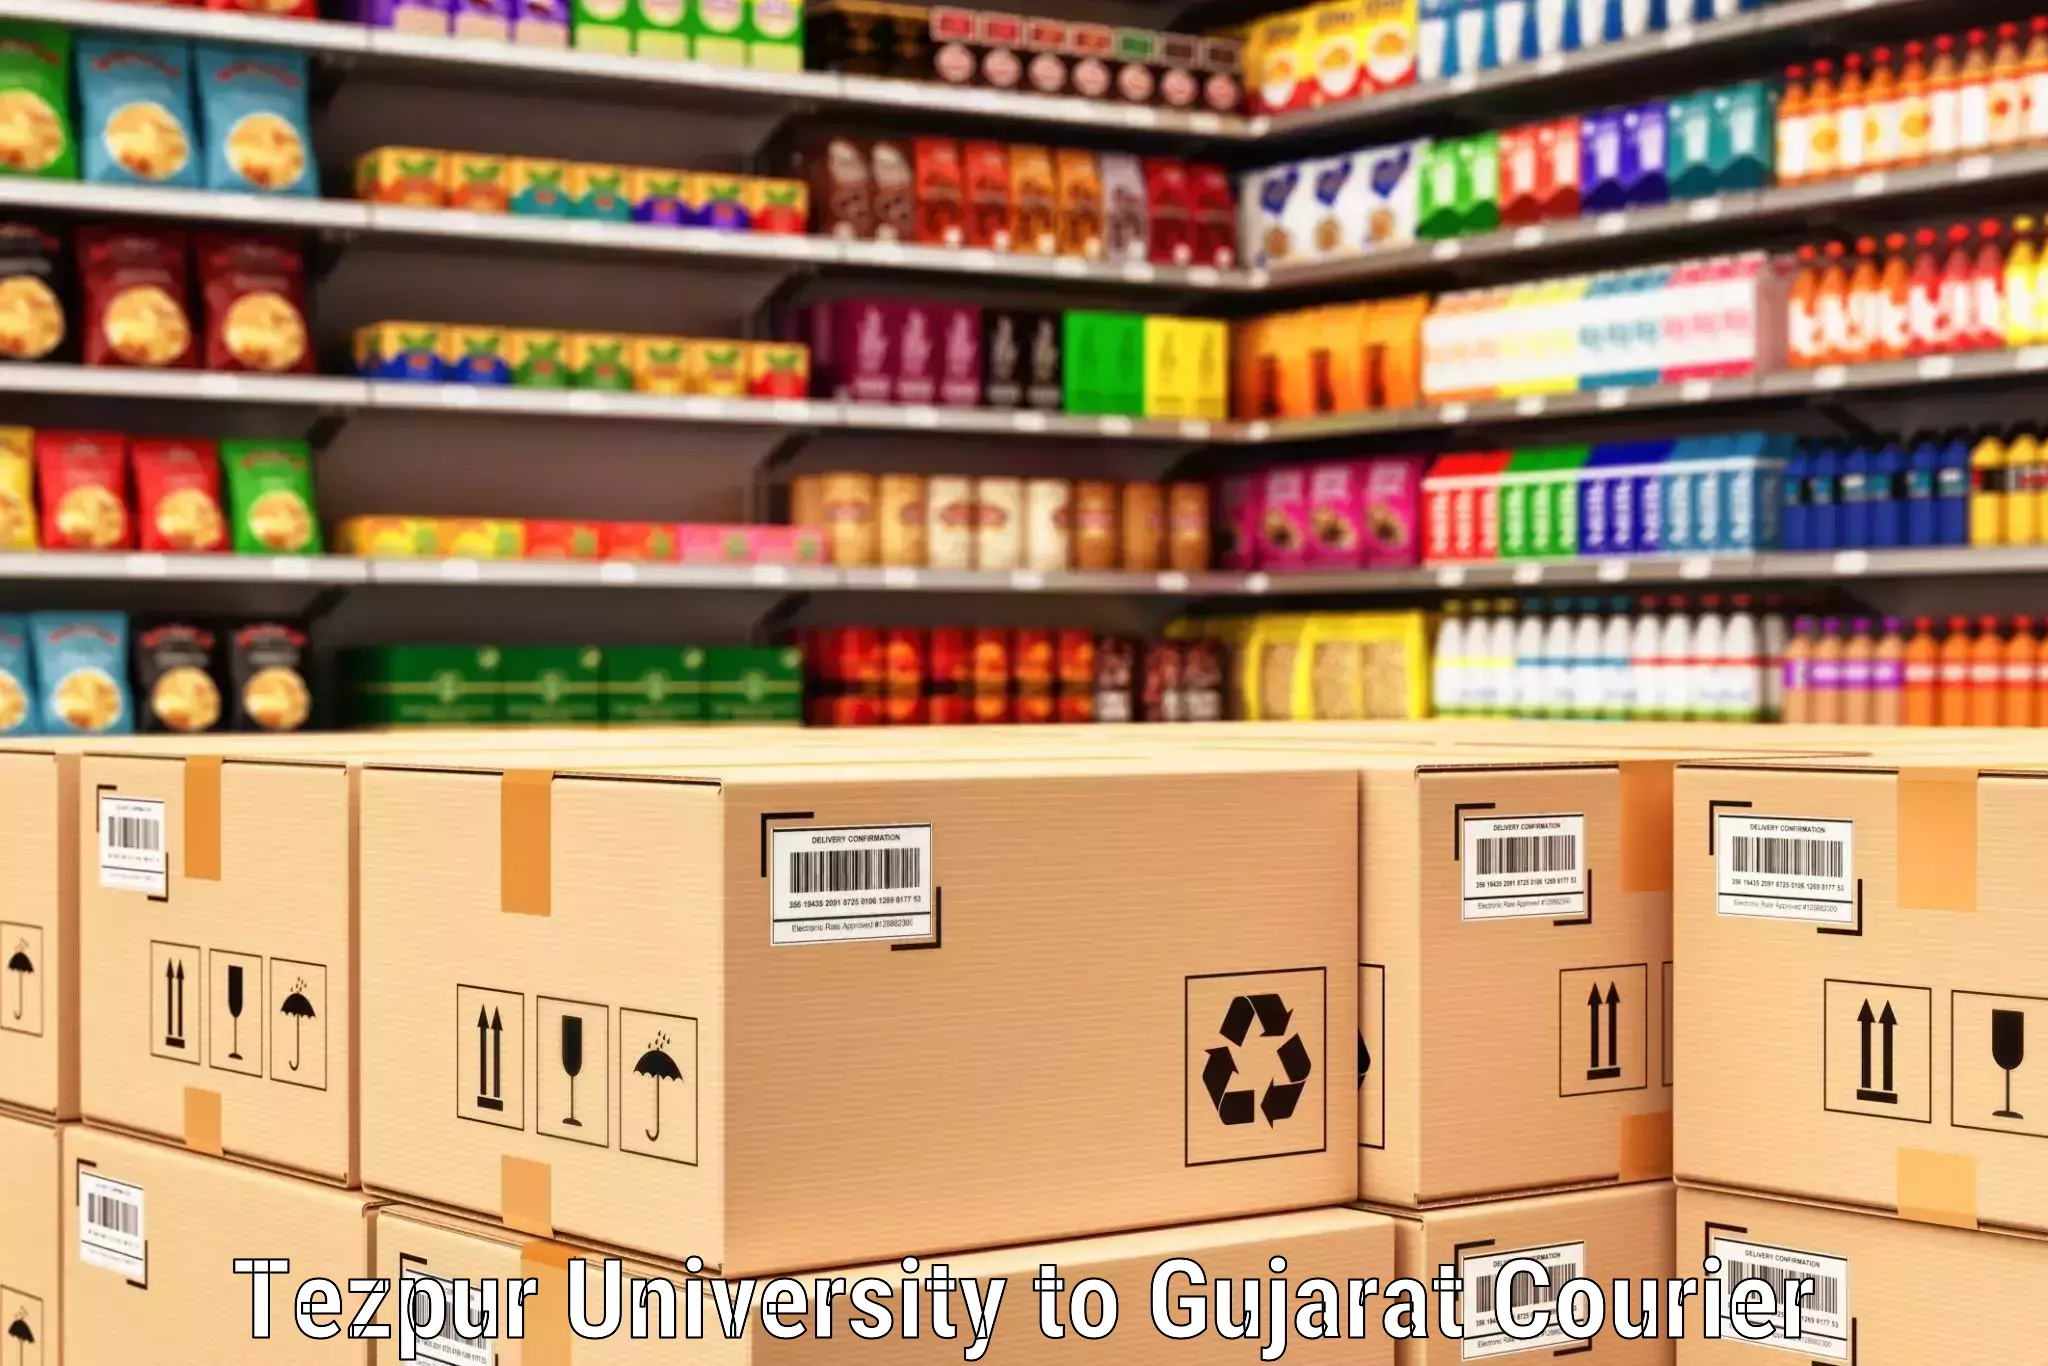 Rapid shipping services Tezpur University to Anand